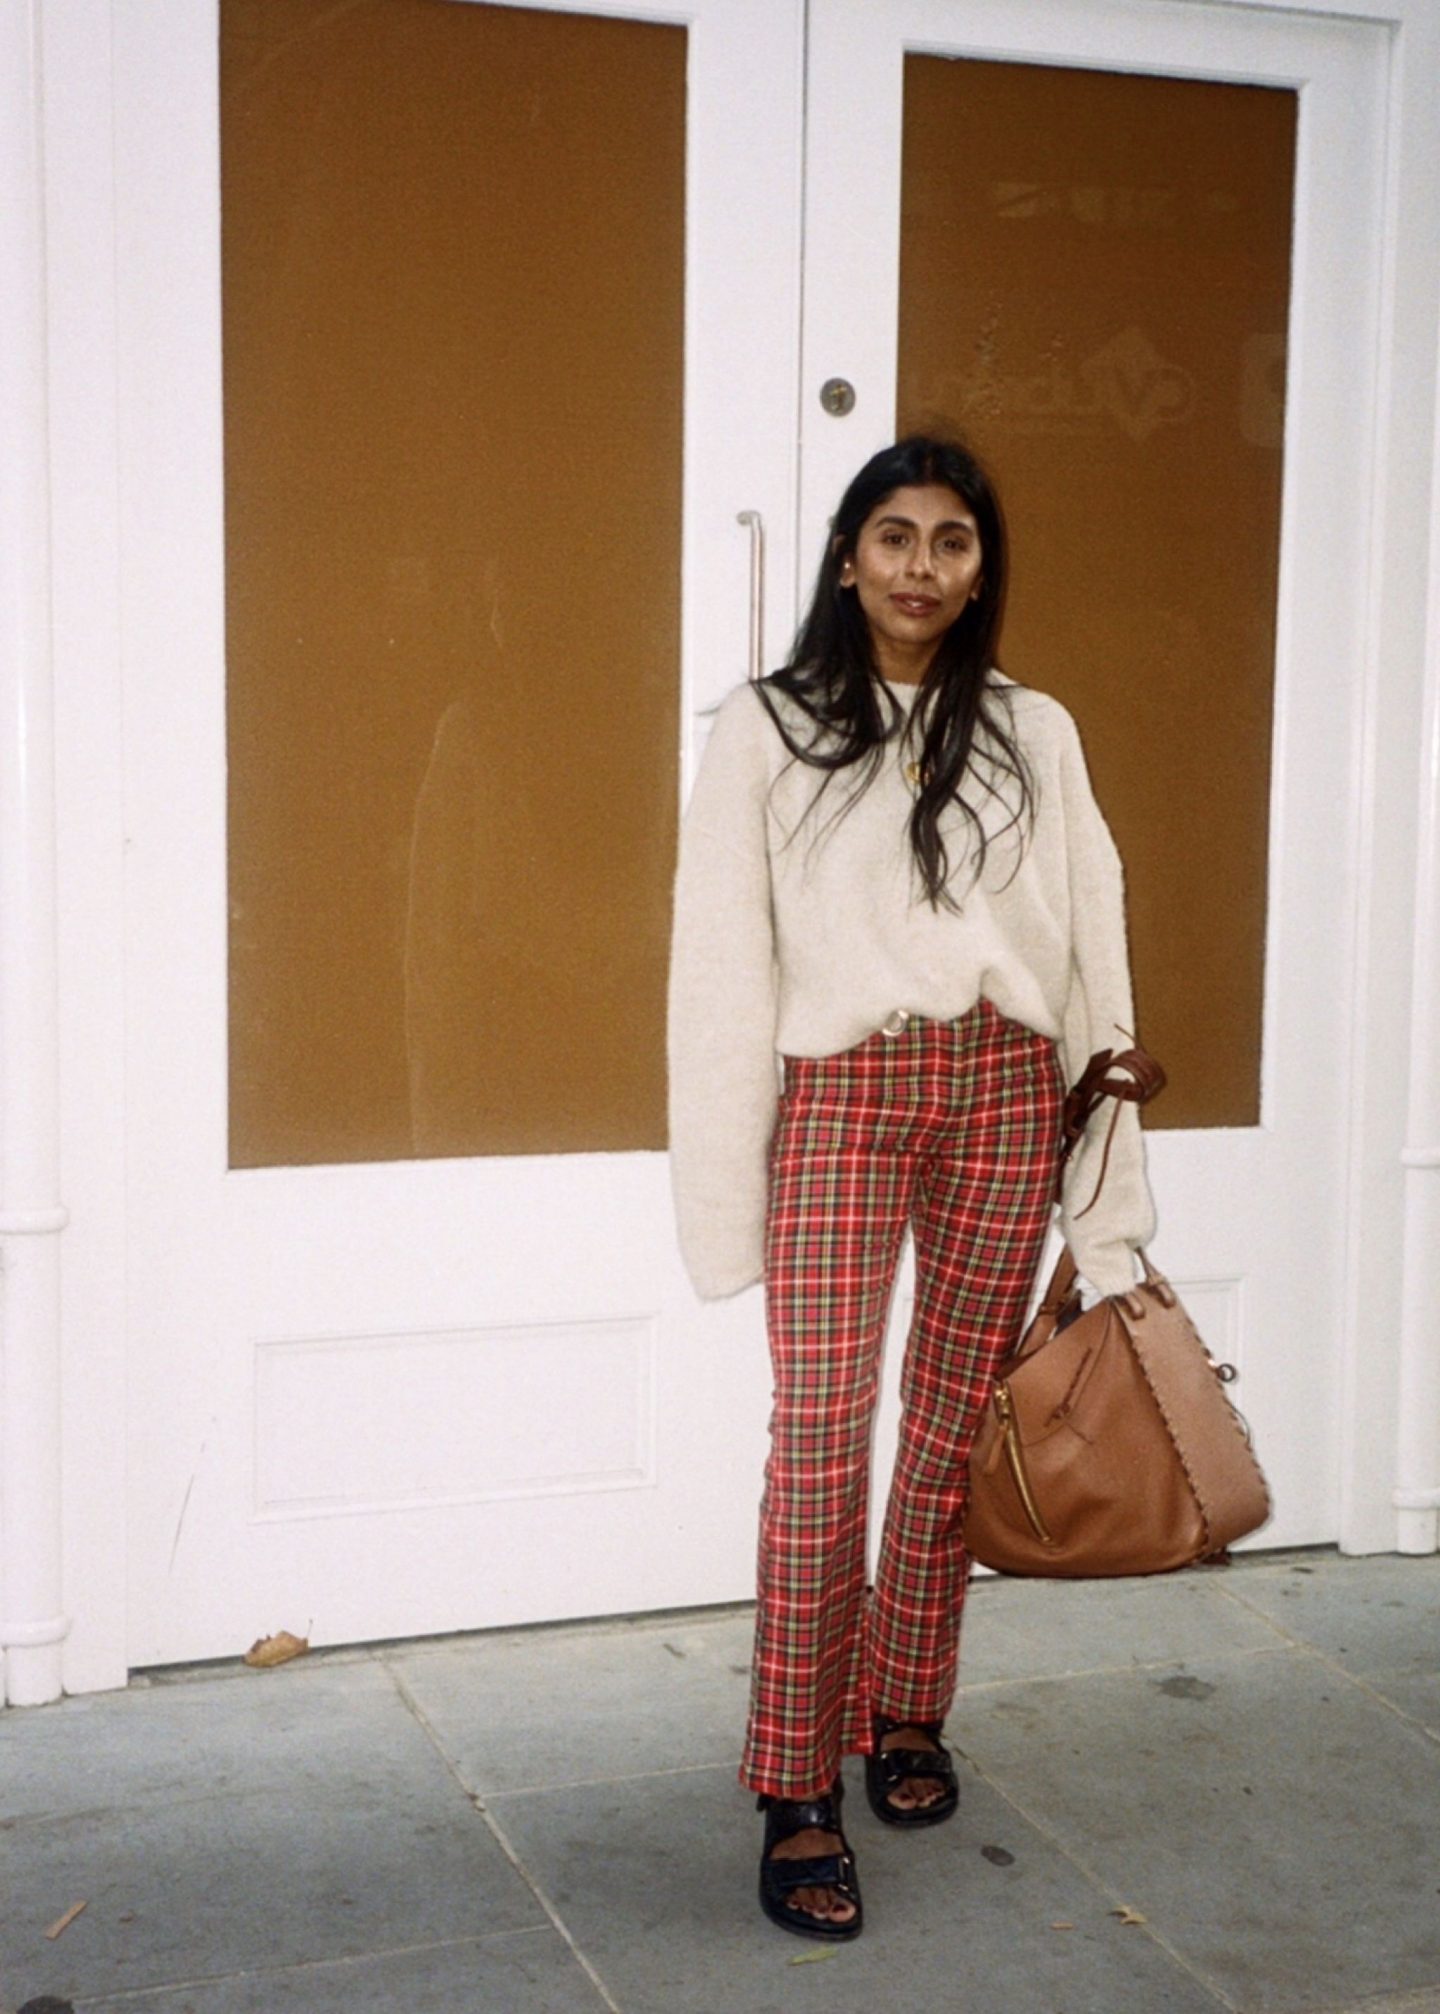 london autumn capsule wardrobe: tartan prints can be clashed from head to toe